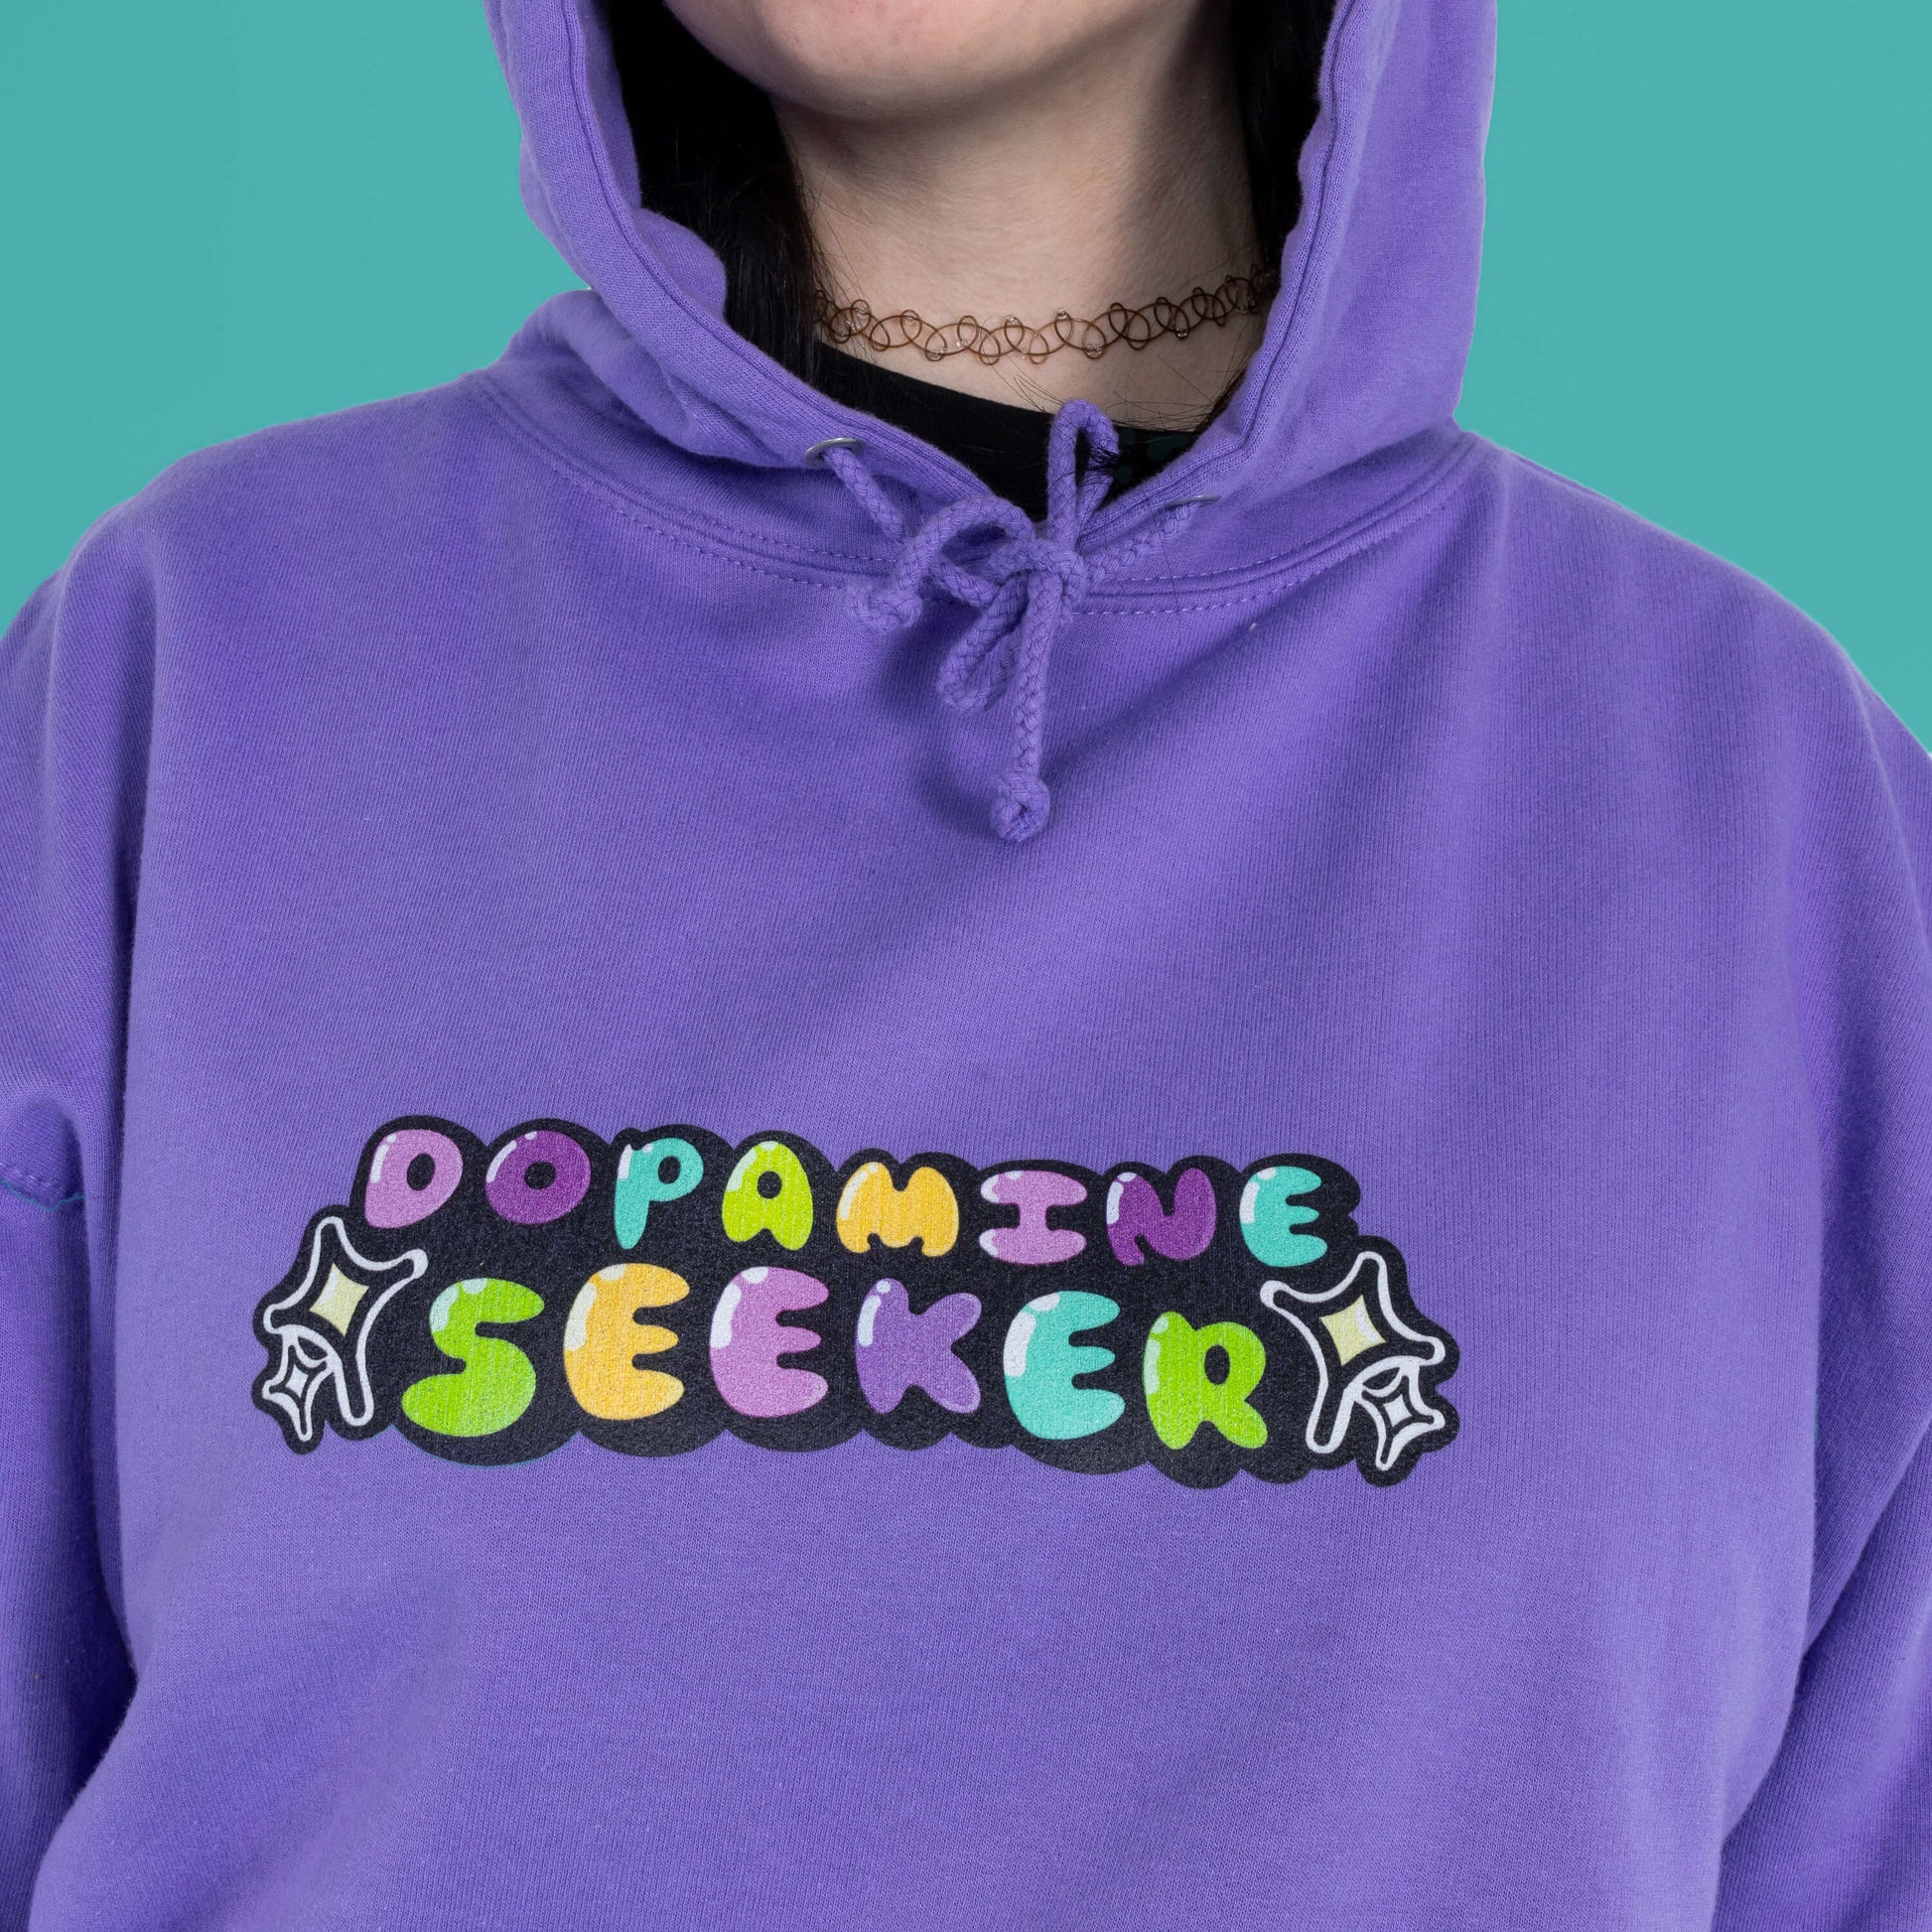 Close up of The Dopamine Seeker Hoodie in digital lavender being modelled by Faeryn. The hoodie design has 'dopamine seeker' written in the middle in rainbow bubble font and black sparkle outlines. The hoodie has purple drawstrings and a large centre pocket. Design is raising awareness for ADHD and neurodivergence.